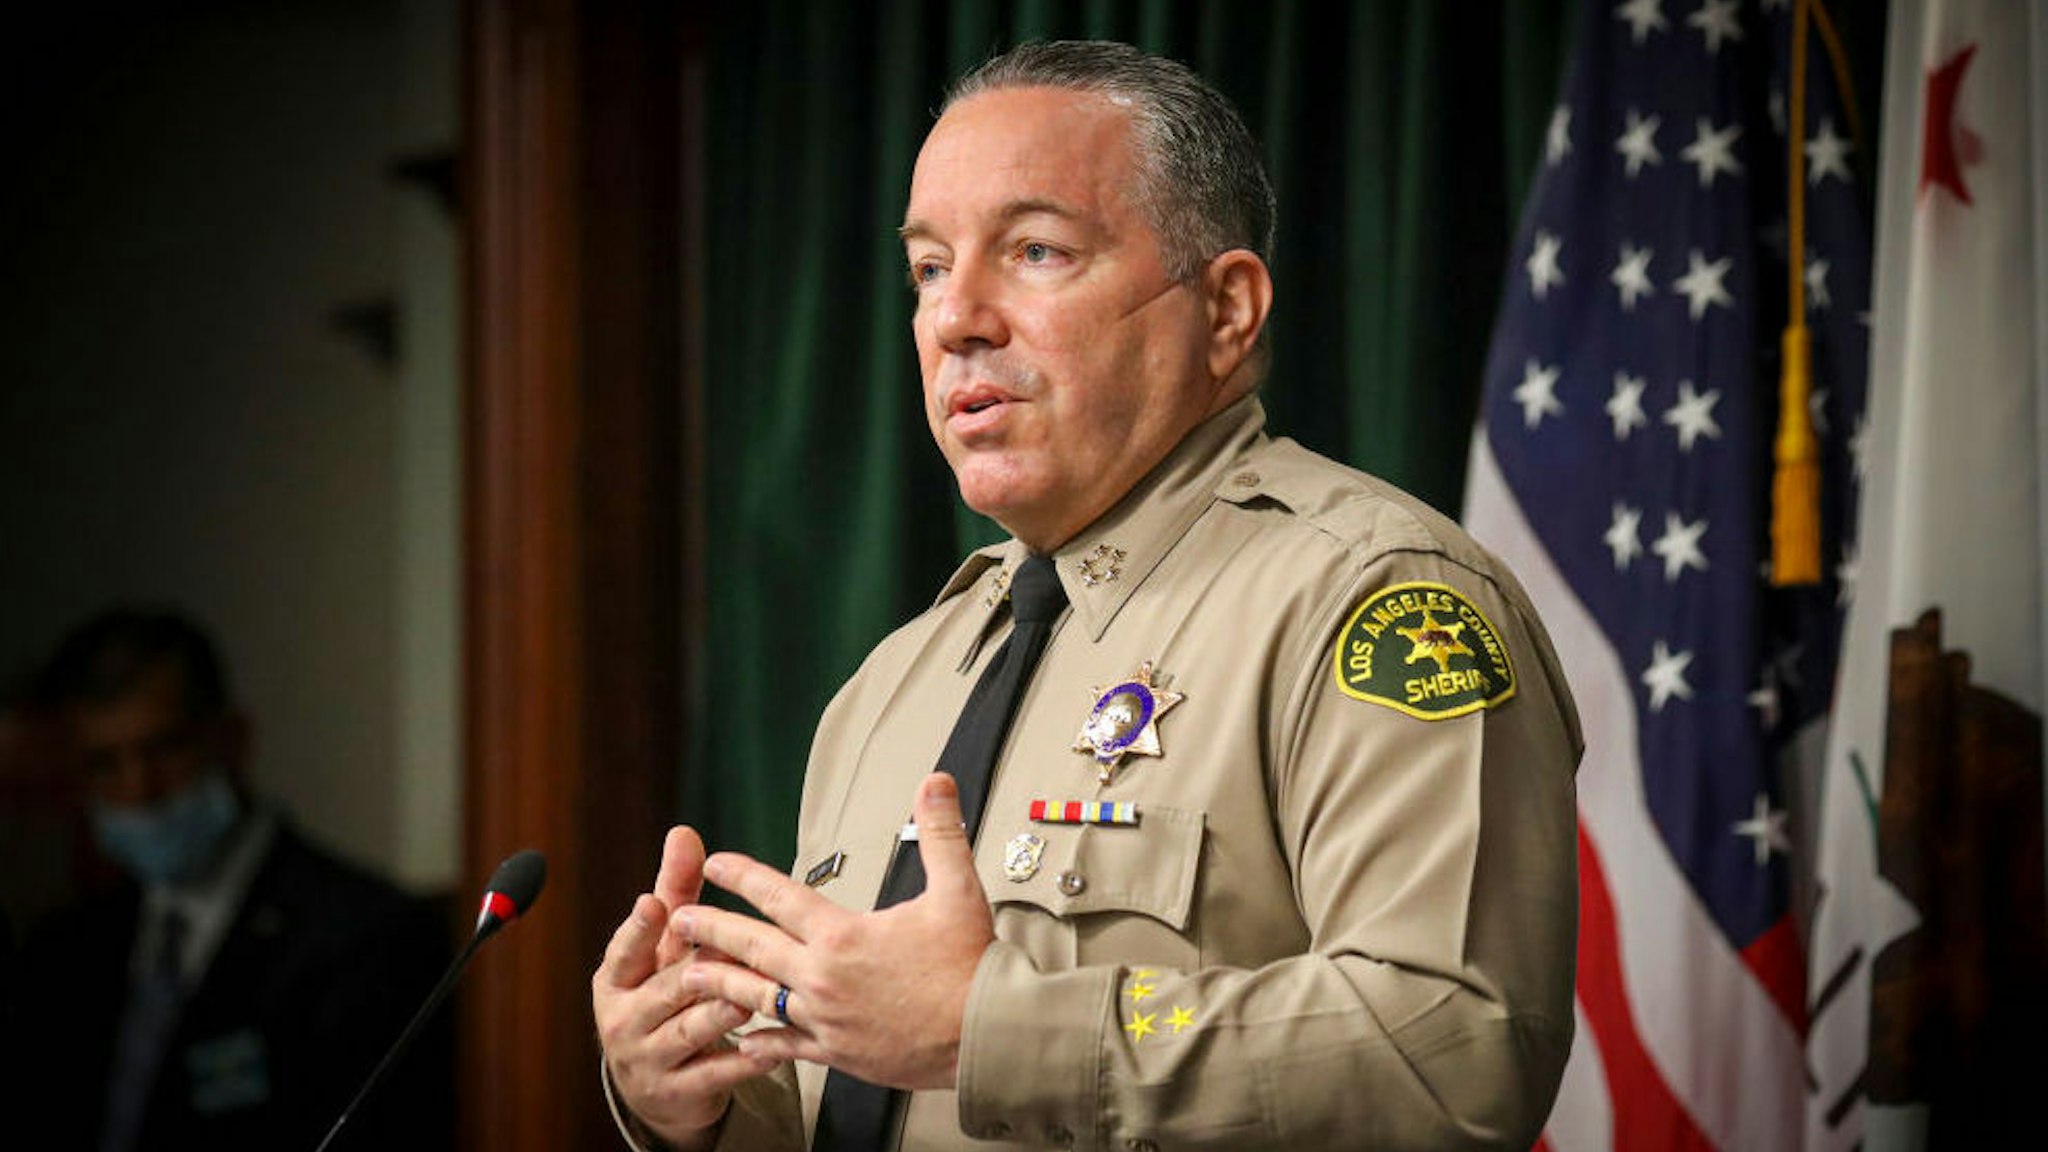 LOS ANGELES, CA - AUGUST 12: Sheriff Alex Villanueva speaks at a news conference to give an update on the fatal shooting by a deputy of Andres Guardado on June 18 near Gardena. in Hall of Justice on Wednesday, Aug. 12, 2020 in Los Angeles, C